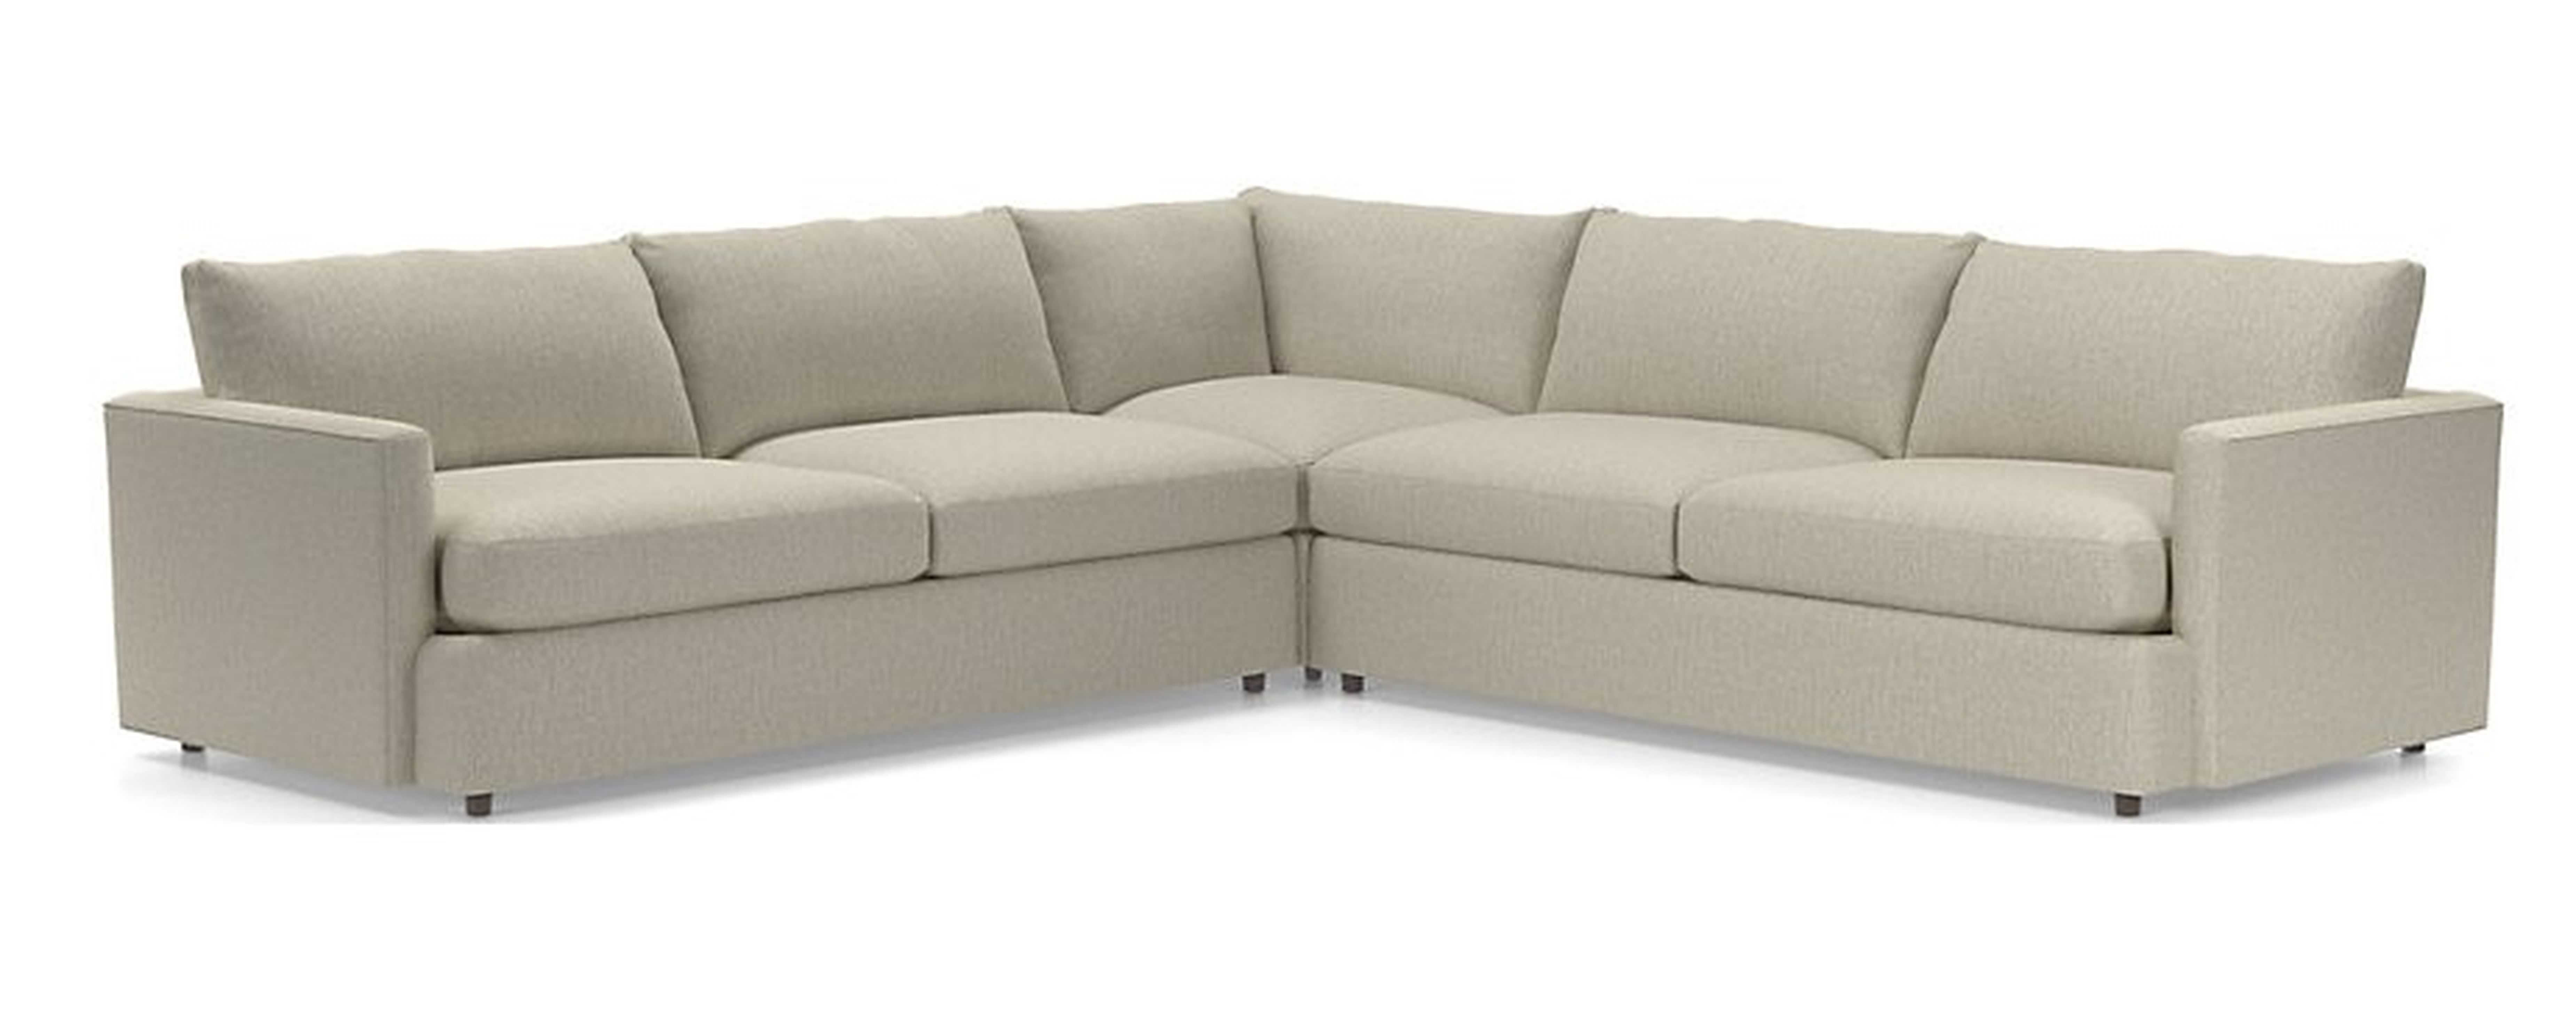 Lounge 3-Piece Sectional Sofa - Taft, Pearl - Crate and Barrel